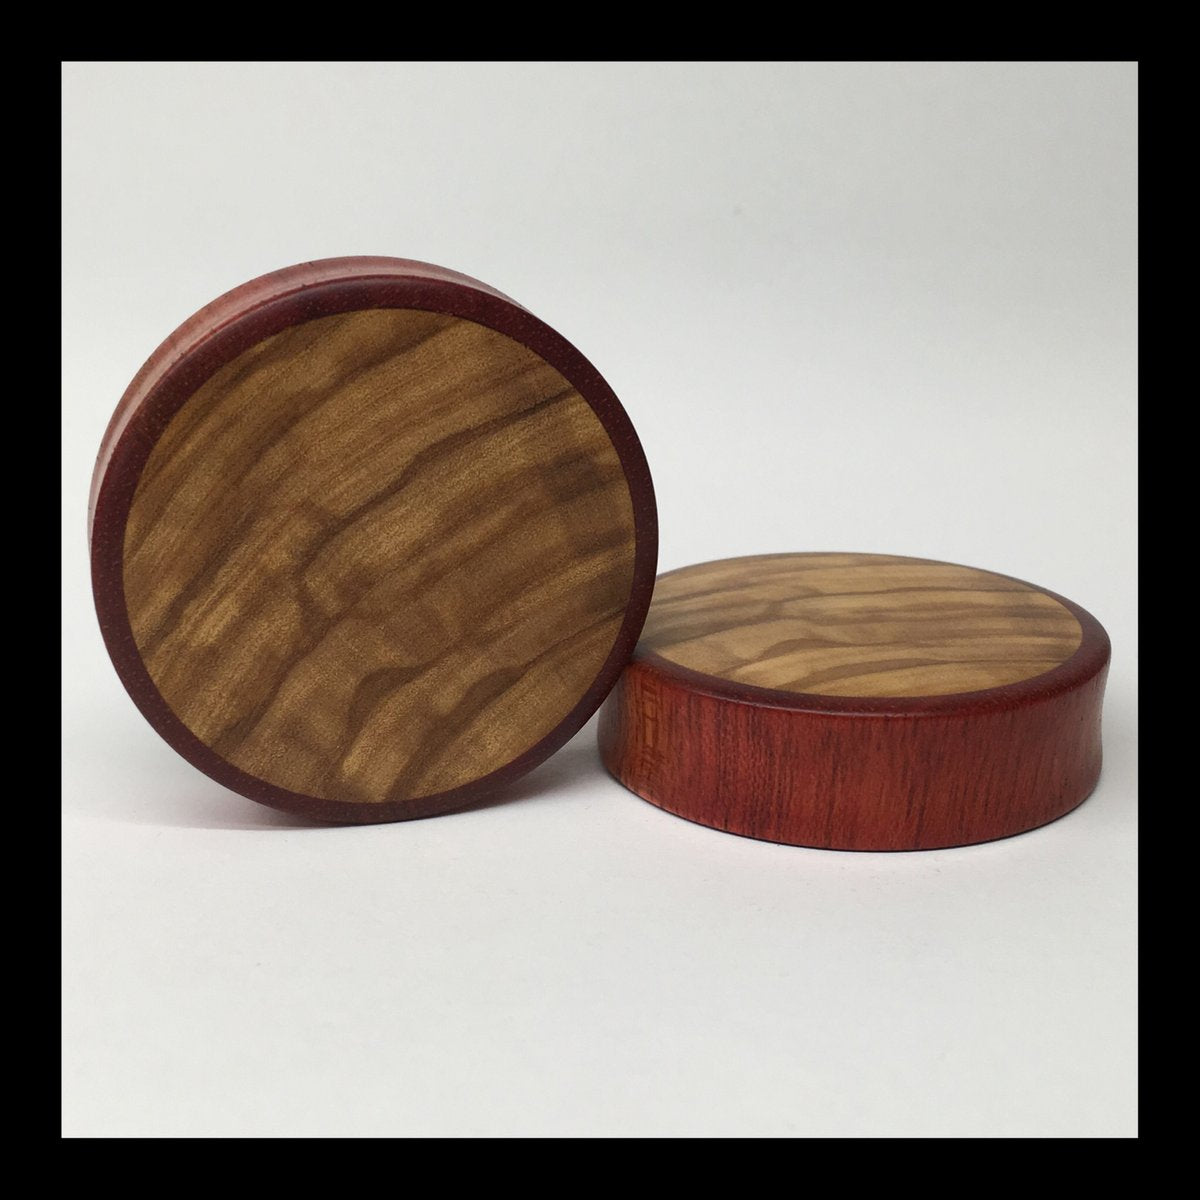 Bloodwood Olivewood Solid Round Plugs